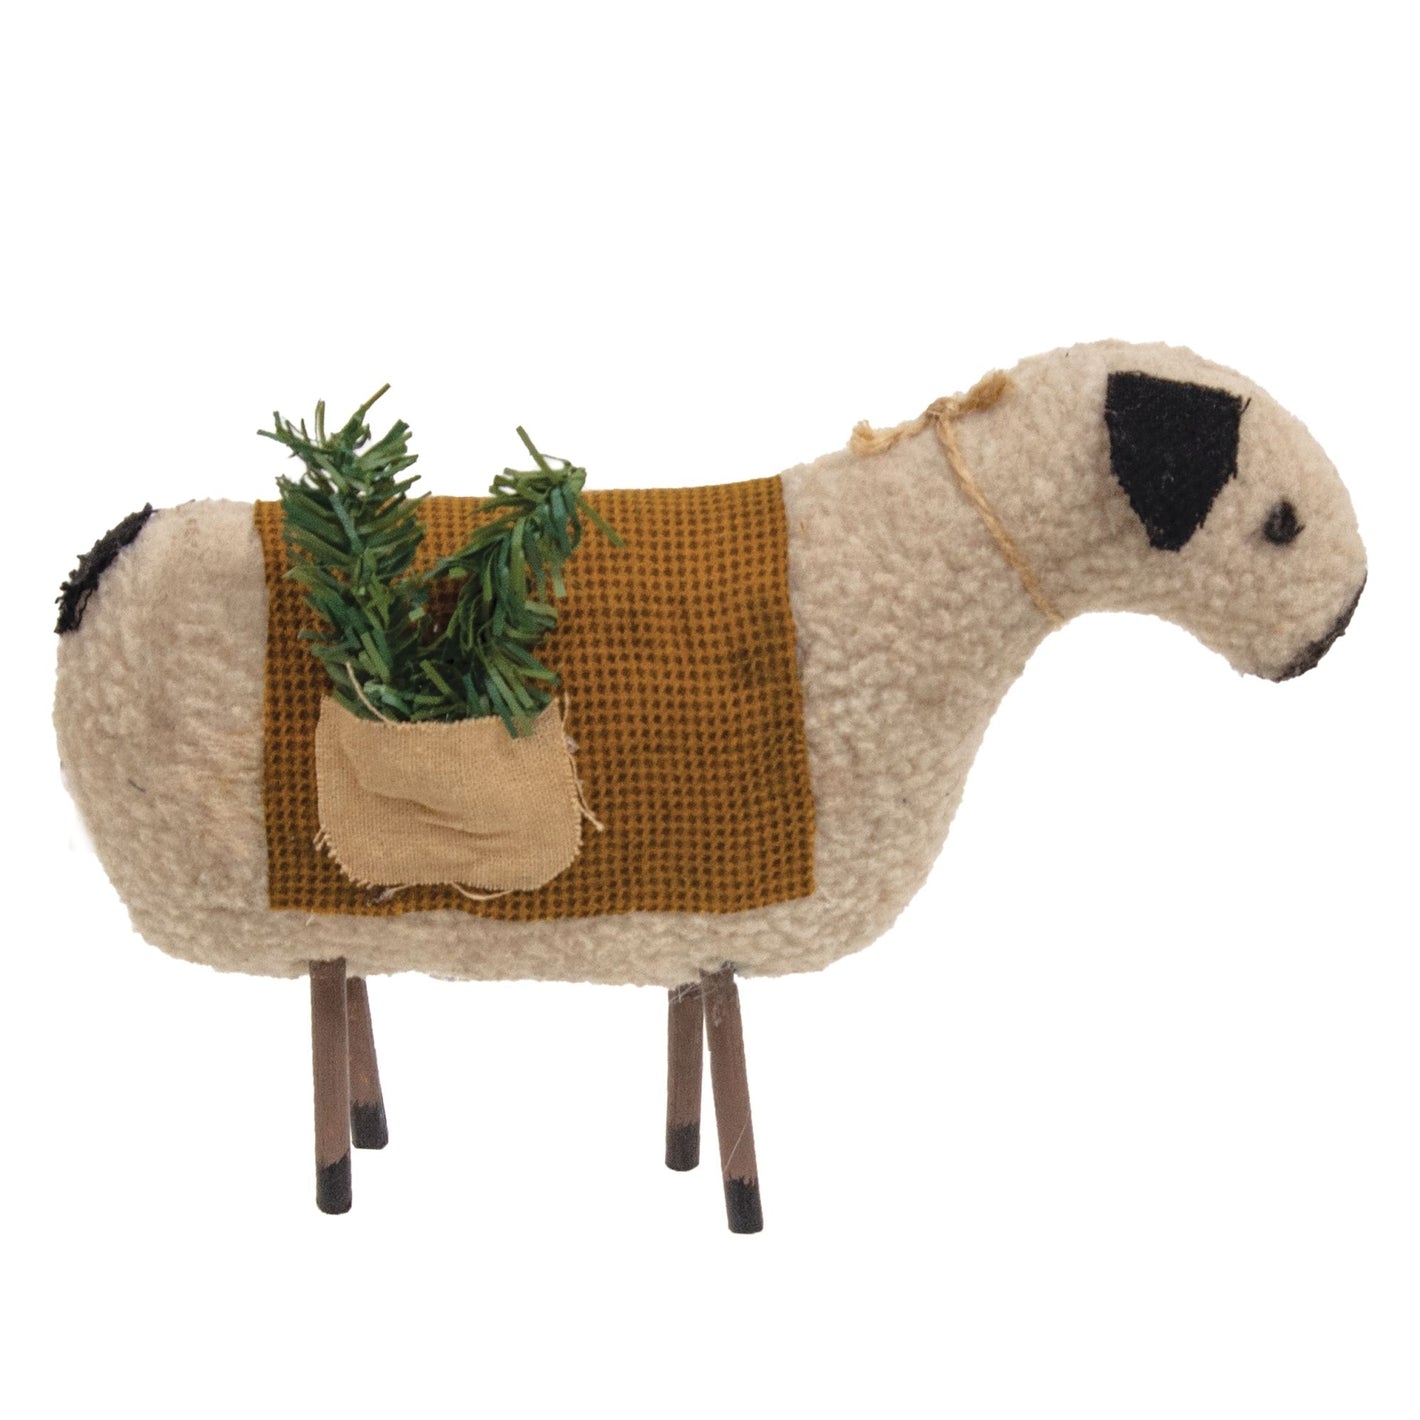 Primitive Farmhouse Christmas Fabric Sheep With Greens 5&quot; Shelf Sitter - The Primitive Pineapple Collection